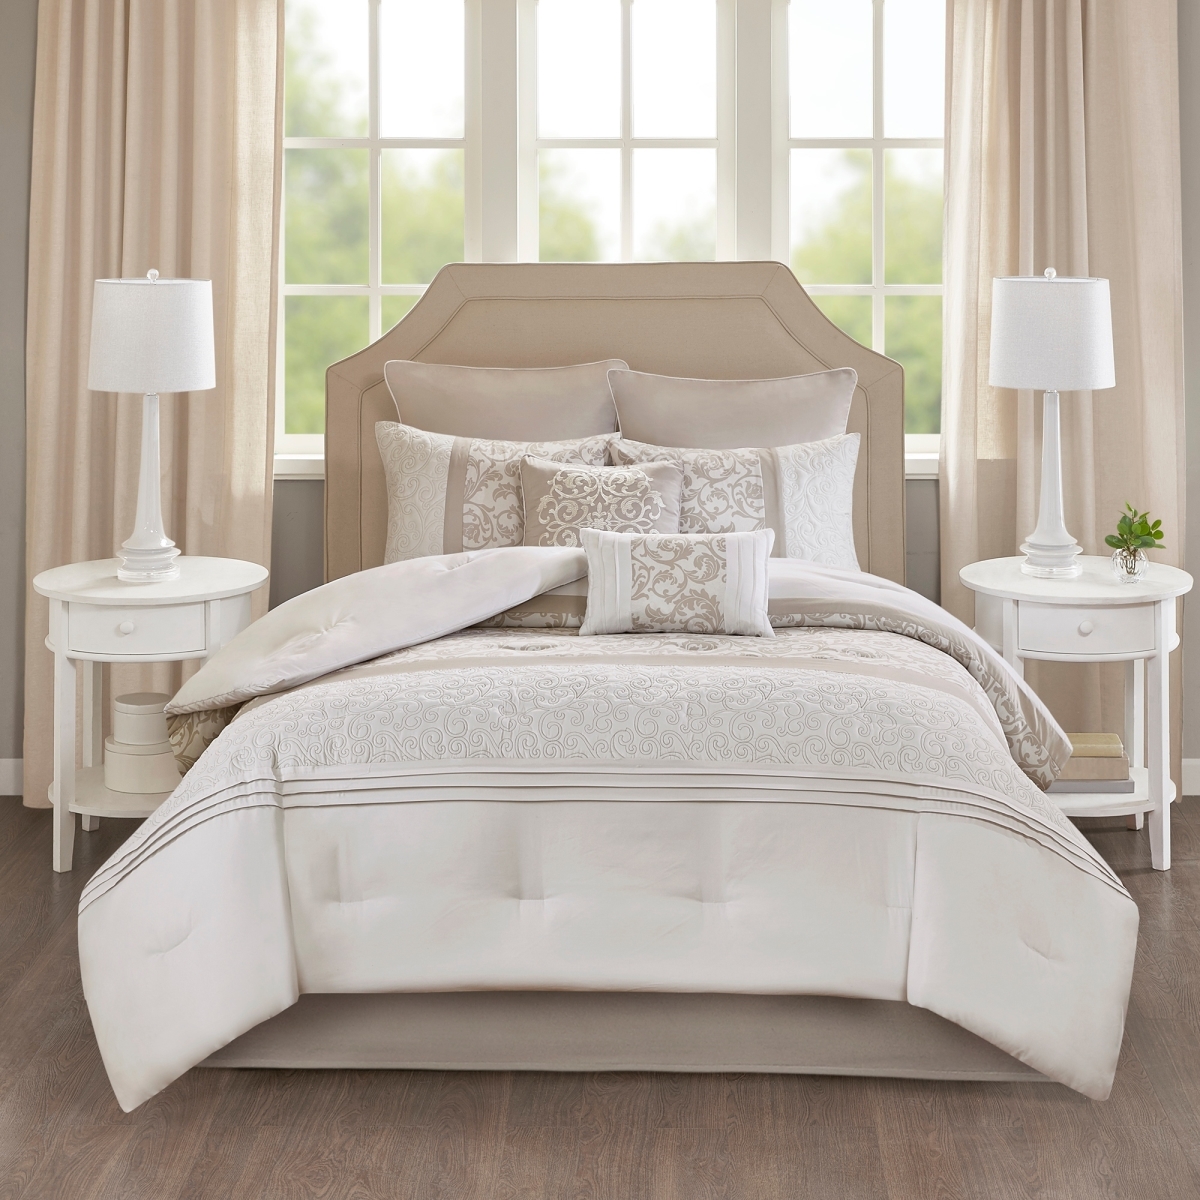 Picture of 510 Design 5DS10-0049 Lynda Embroidered Comforter Set, Neutral - Cal King - 8 Piece